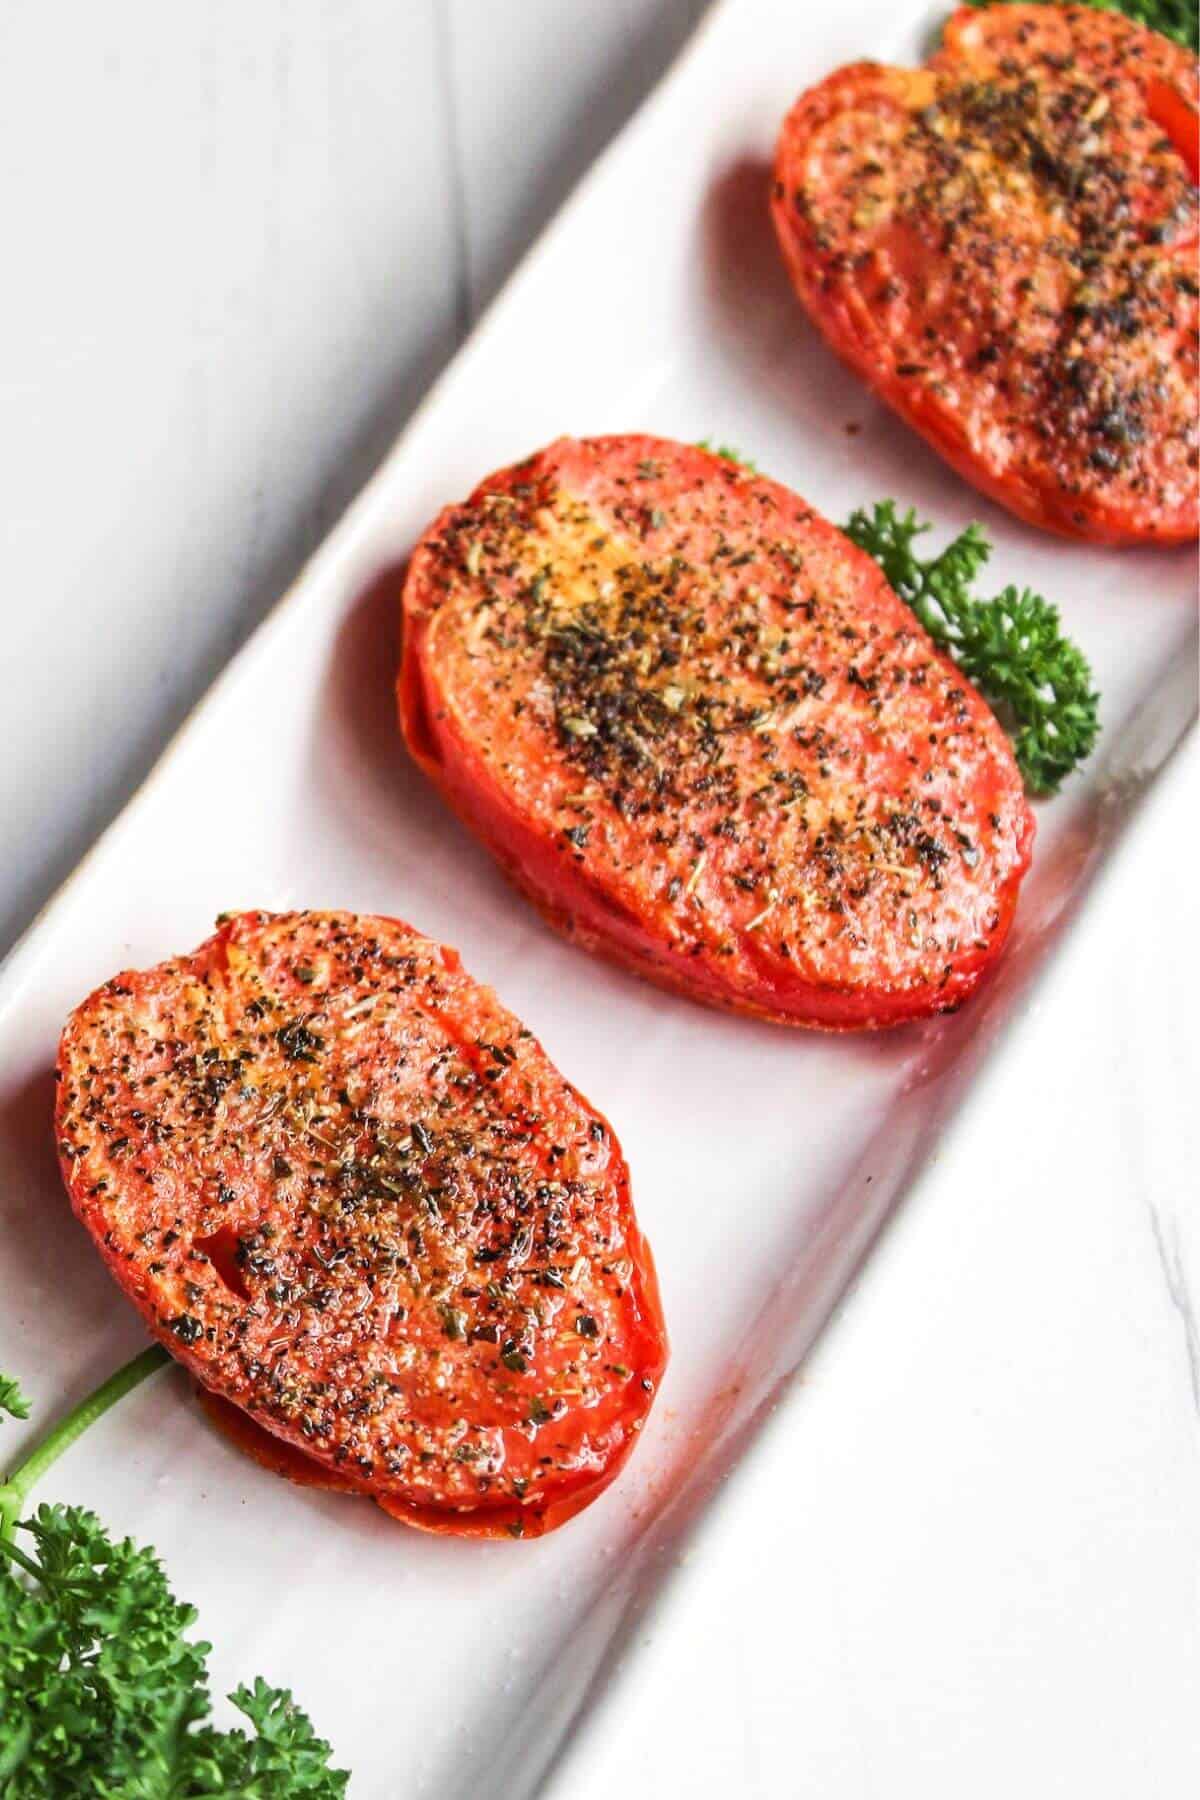 Three air fryer roasted tomatoes on a white plate with parsley.